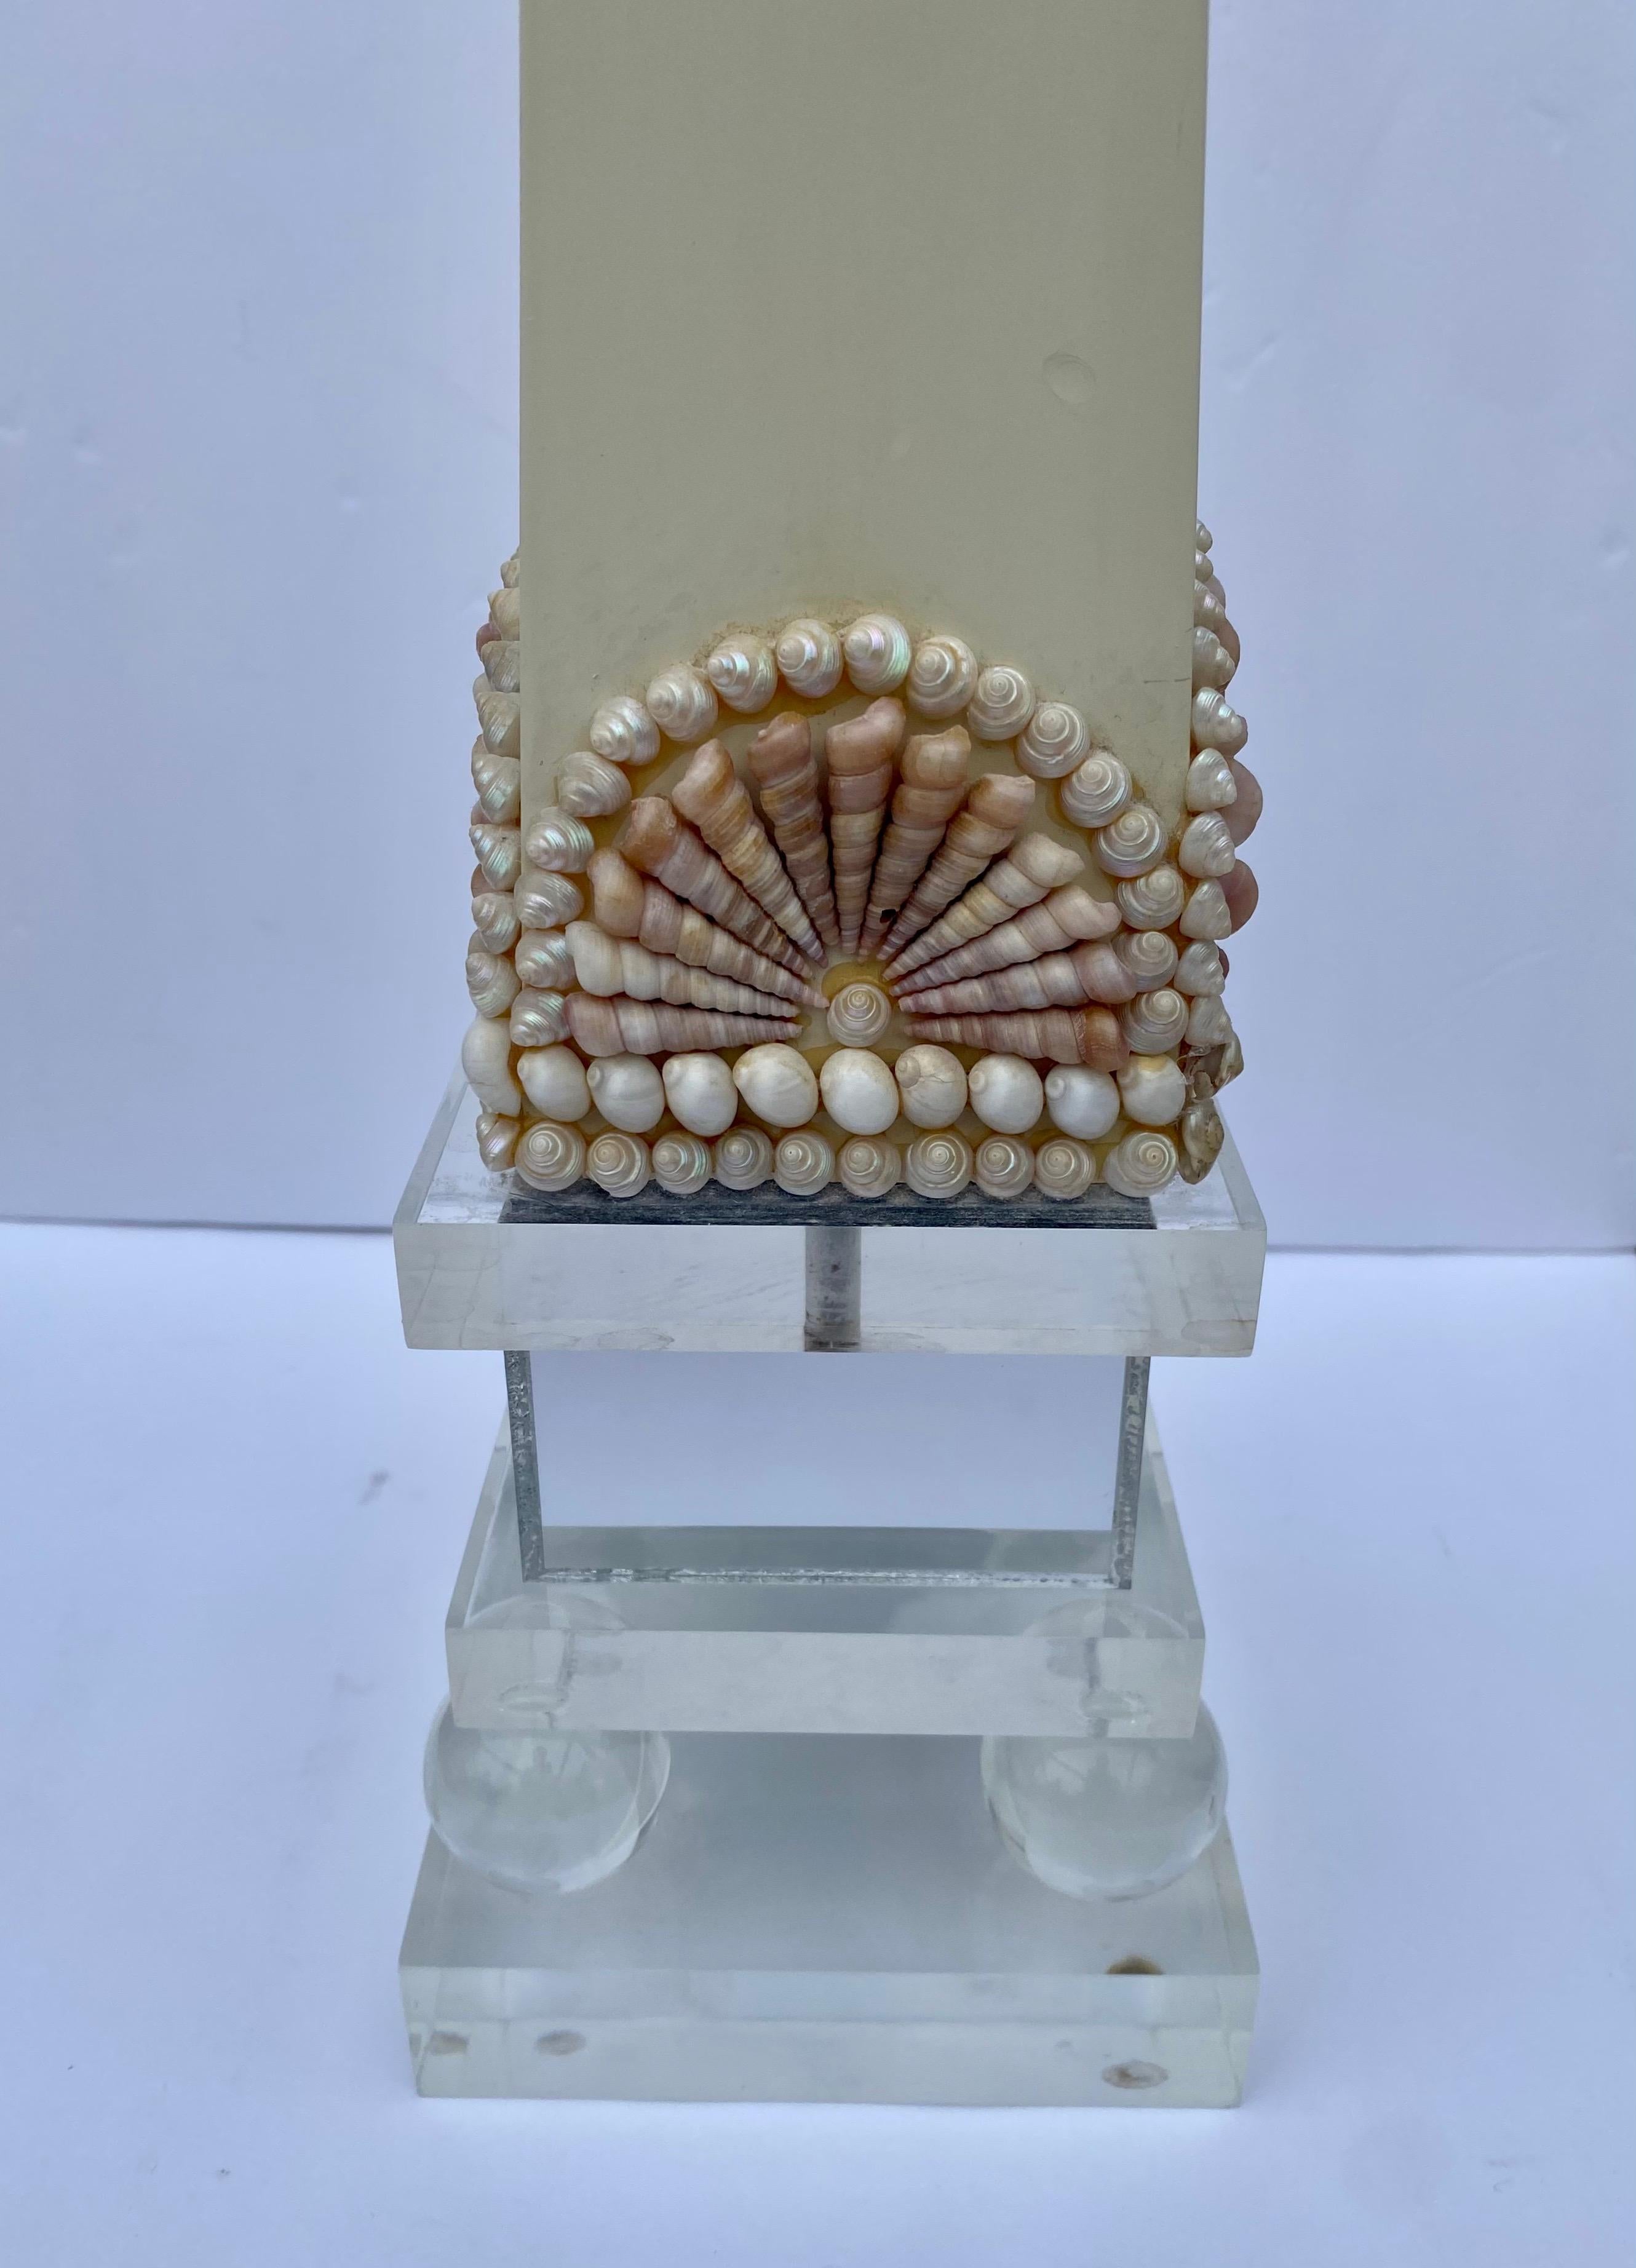 Post Modern 1980s Lucite Shell Seashell Mirror Lacquer Obelisk Table Sculpture For Sale 4